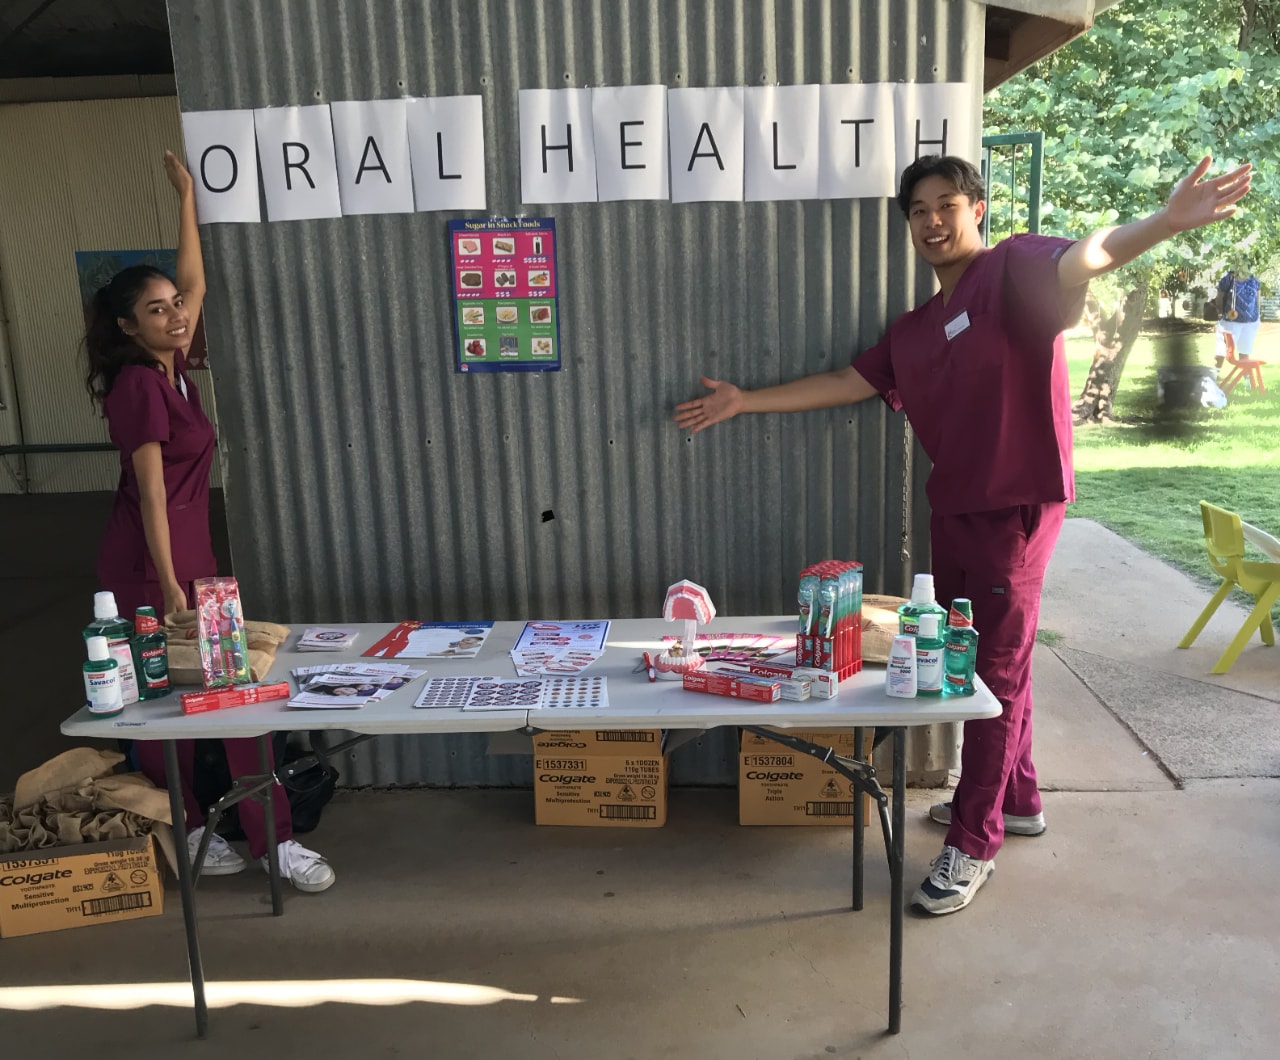 Amreen Khan and Ricky Zhang with their oral health stand at a primary school fete in Bourke